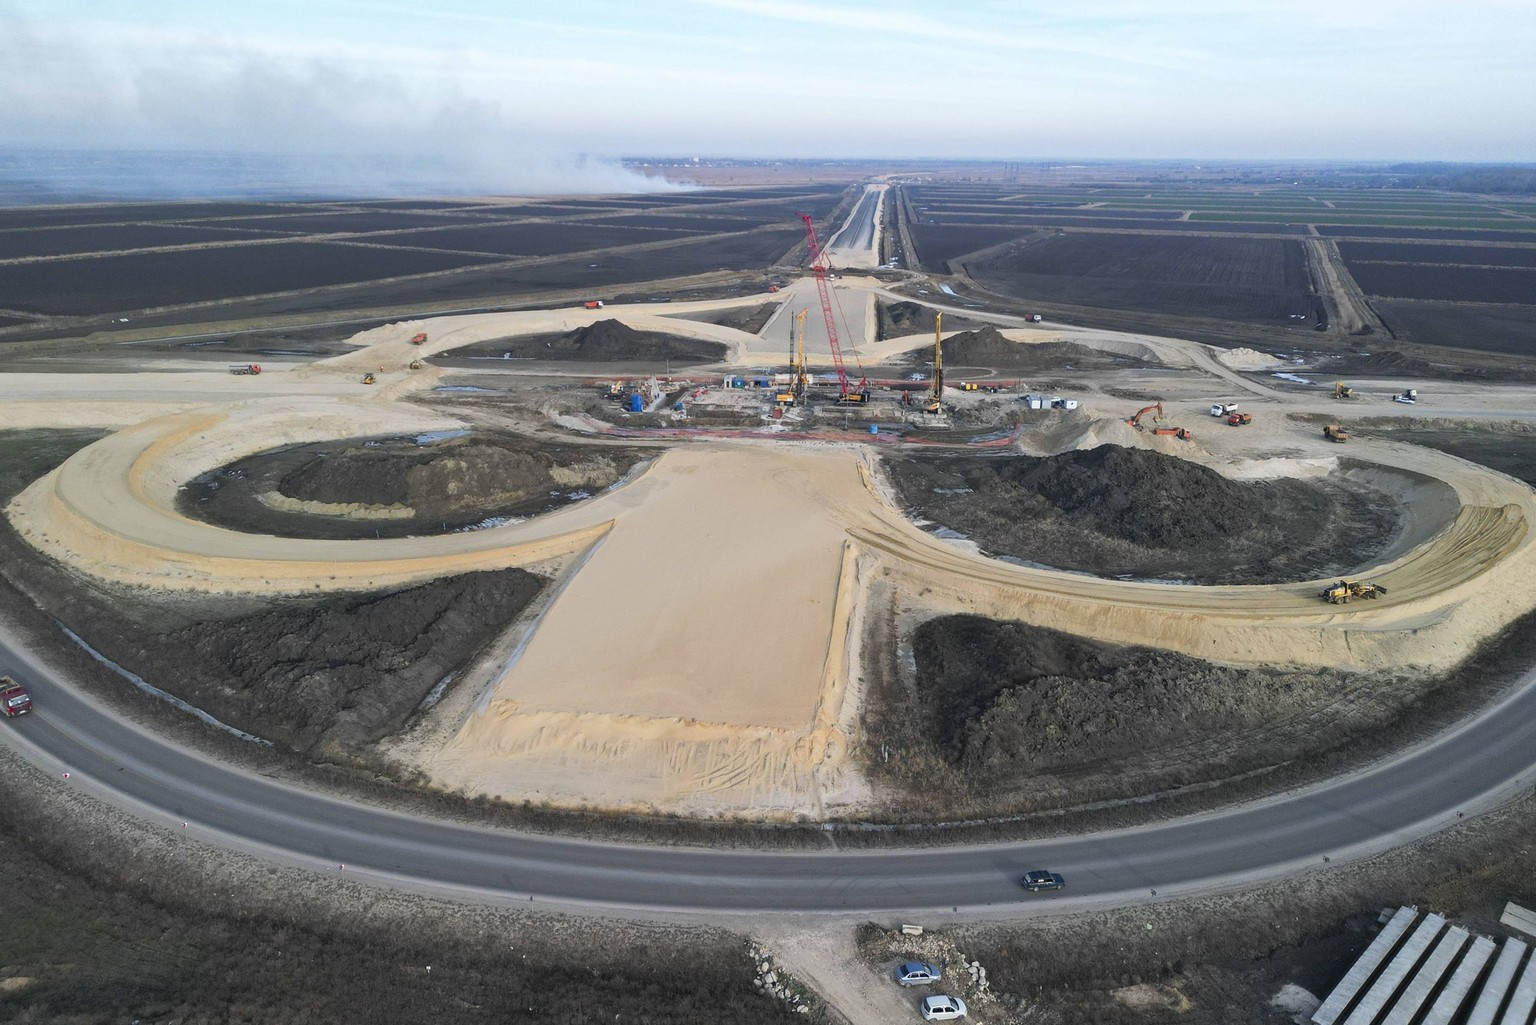 Russia: Construction of road to link Krasnodar and Crimean Bridge RUSSIA, KRASNODAR REGION - JANUARY 12, 2023: A view shows the construction of a motorway to link the city of Krasnodar and Crimean Bri ...